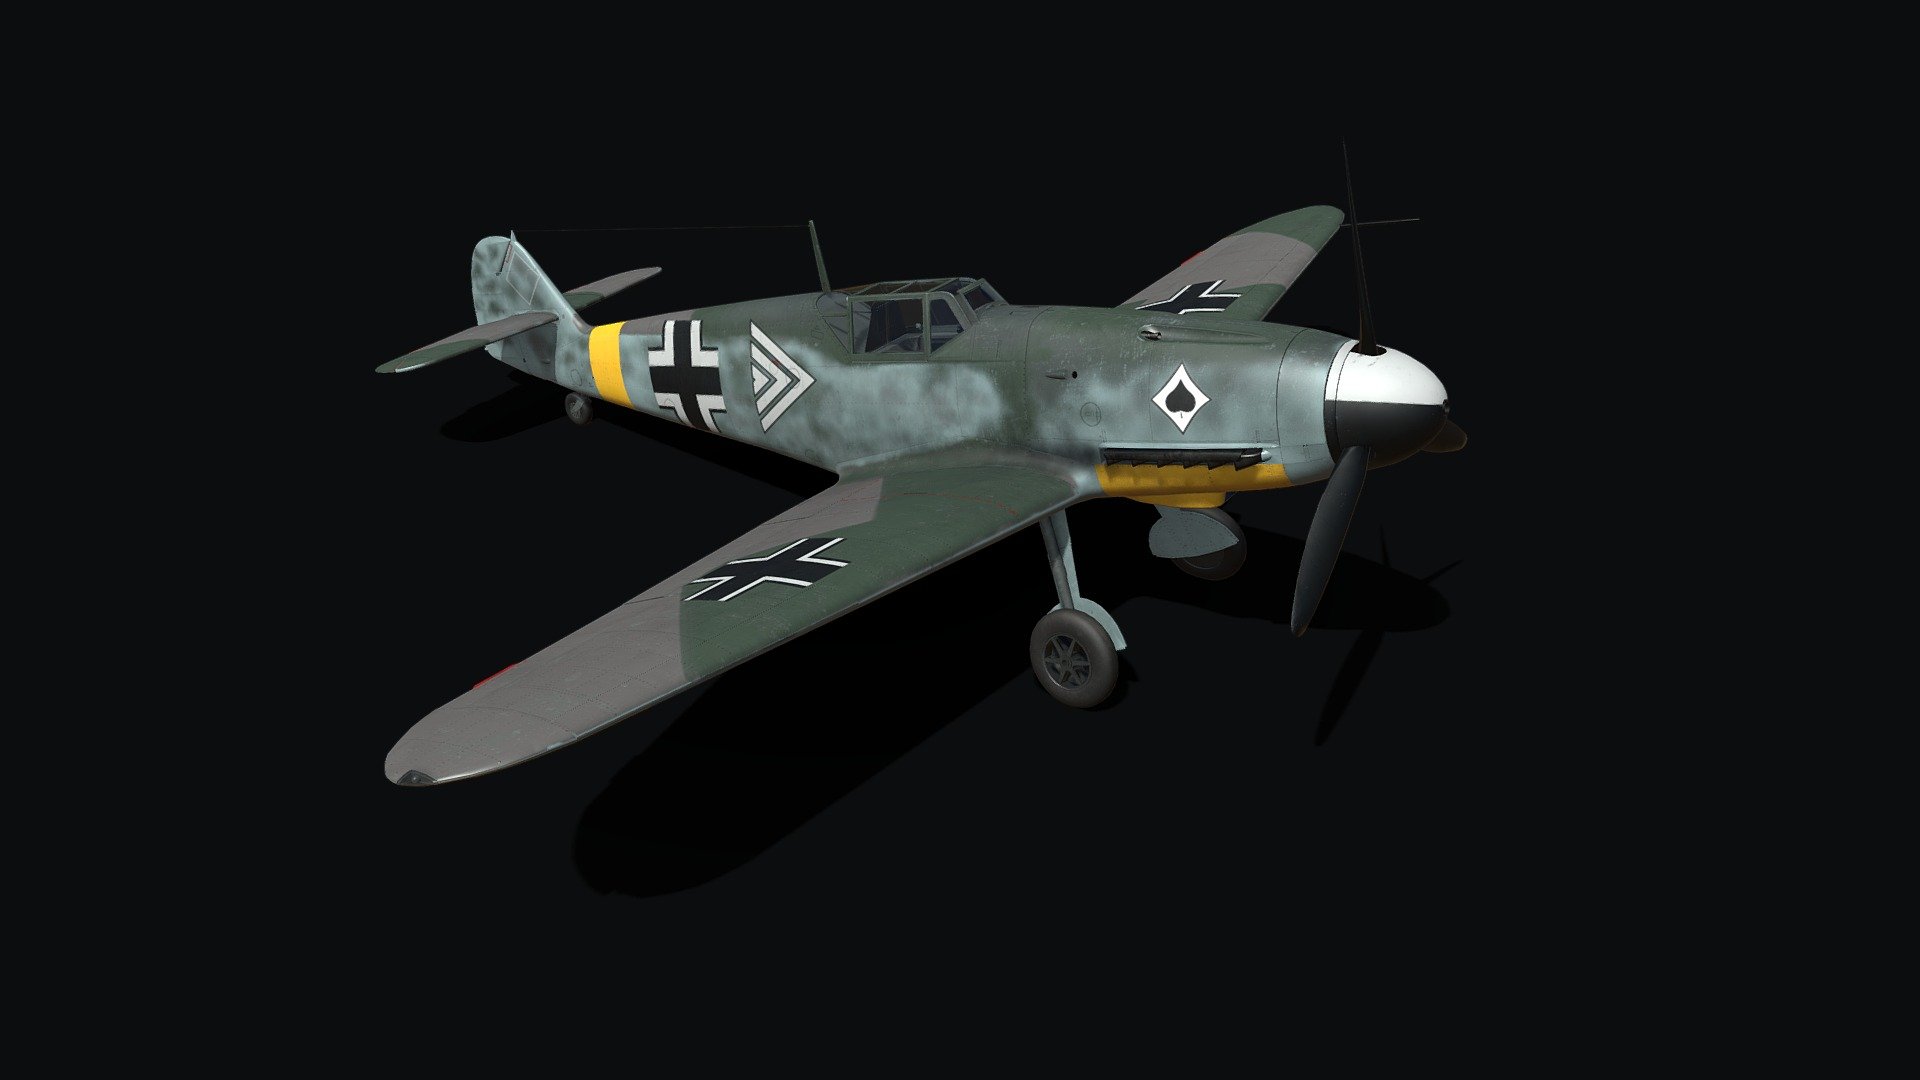 The Messerschmitt Bf 109 is a German World War II fighter aircraft that was, the backbone of the Luftwaffe's fighter force. It was one of the most advanced fighters when it first appeared, with an all-metal monocoque construction, a closed canopy, and retractable landing gear. 

Redesign during 1939–40 gave birth to the F series. The Friedrich had new wings, cooling system and fuselage aerodynamics, with the 1,175 PS (864 kW; 1,159 hp) DB 601N (F-1, F-2). Considered by many as the high-water mark of Bf 109 development, the F series abandoned the wing cannon and concentrated all armament in the forward fuselage with a pair of synchronized machine guns above and a single 15 or 20 mm Motorkanone-mount cannon behind the engine 3d model